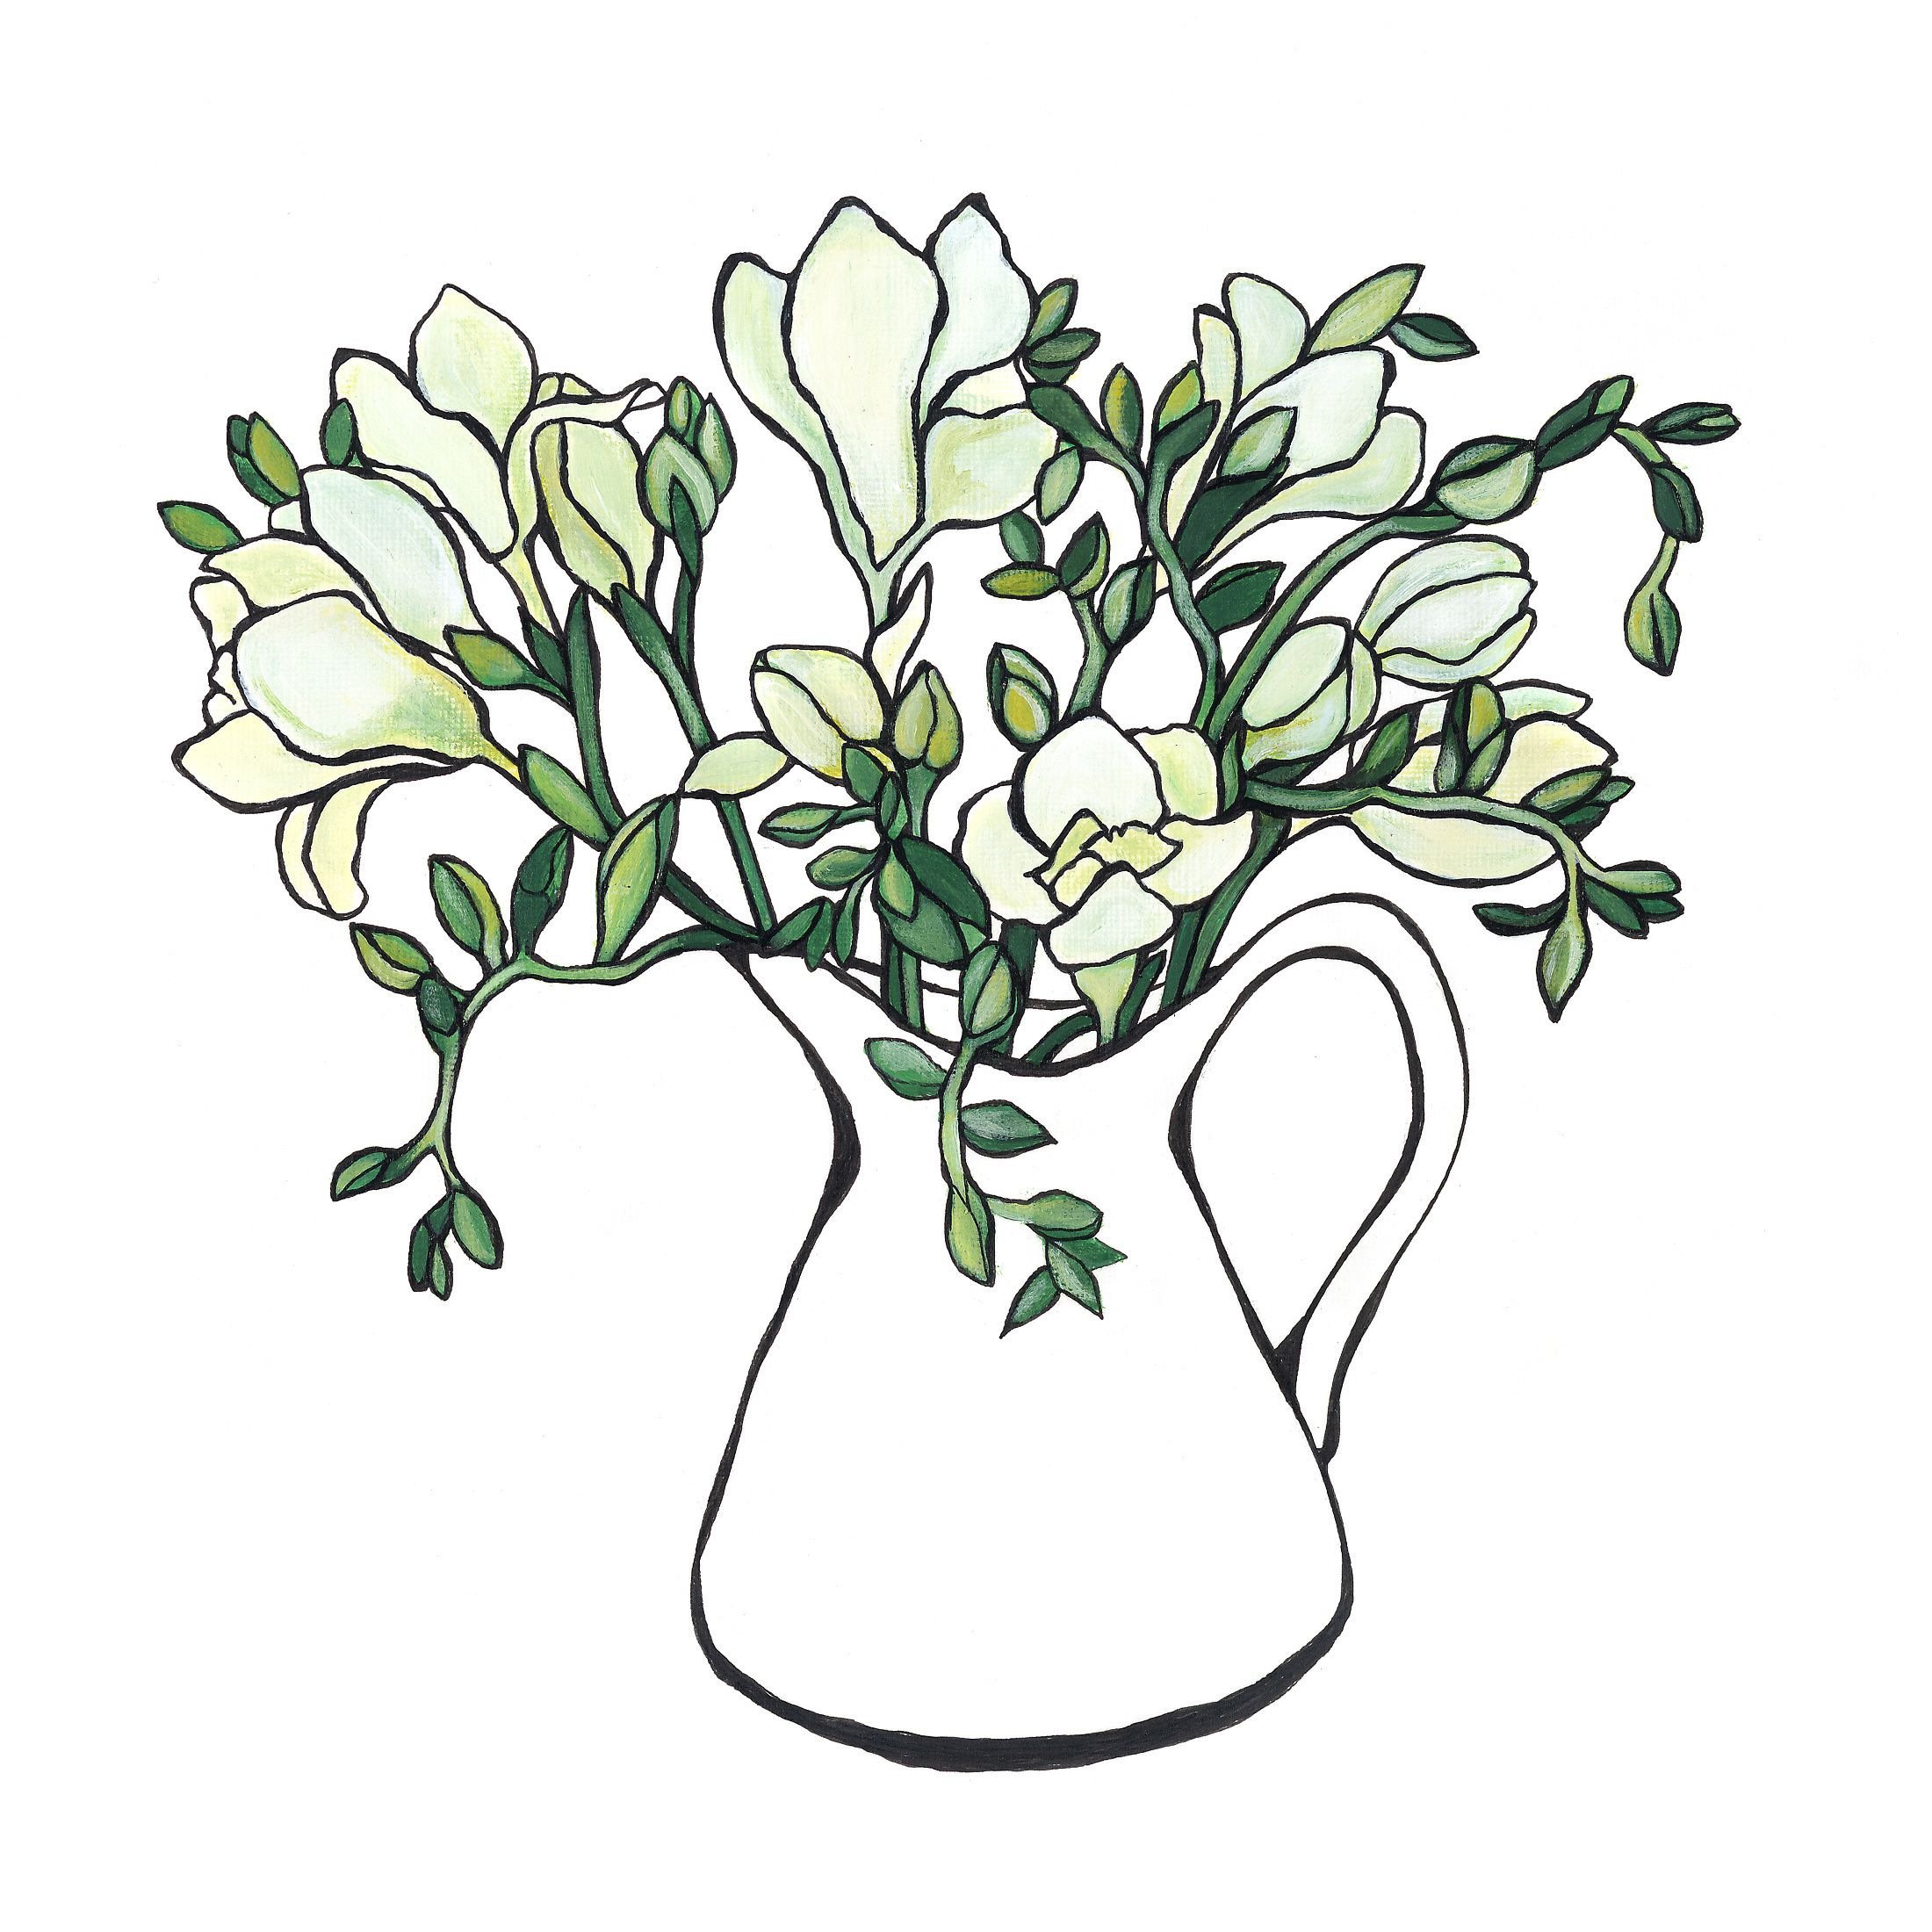 Jug of Freesias by Lucy Routh